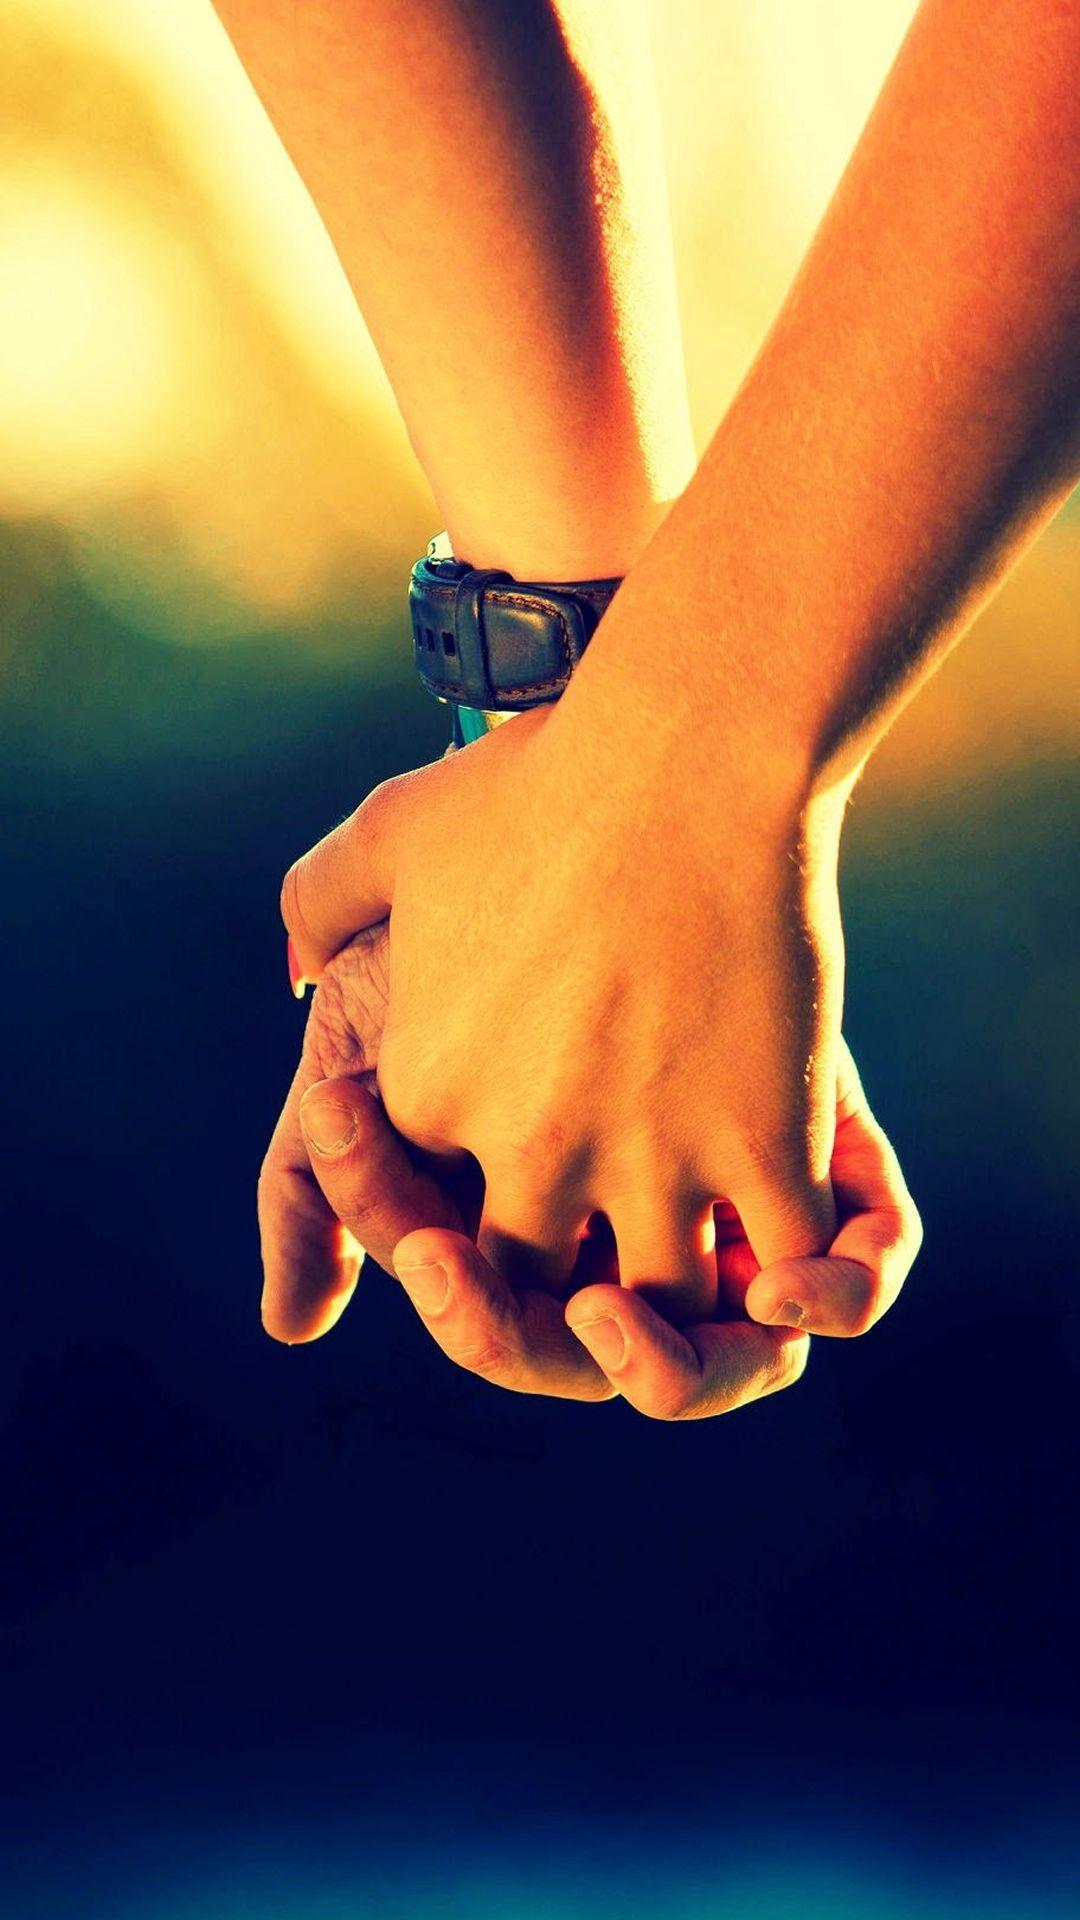 Couple Holding Hands iPhone 8 Wallpaper. Couple holding hands